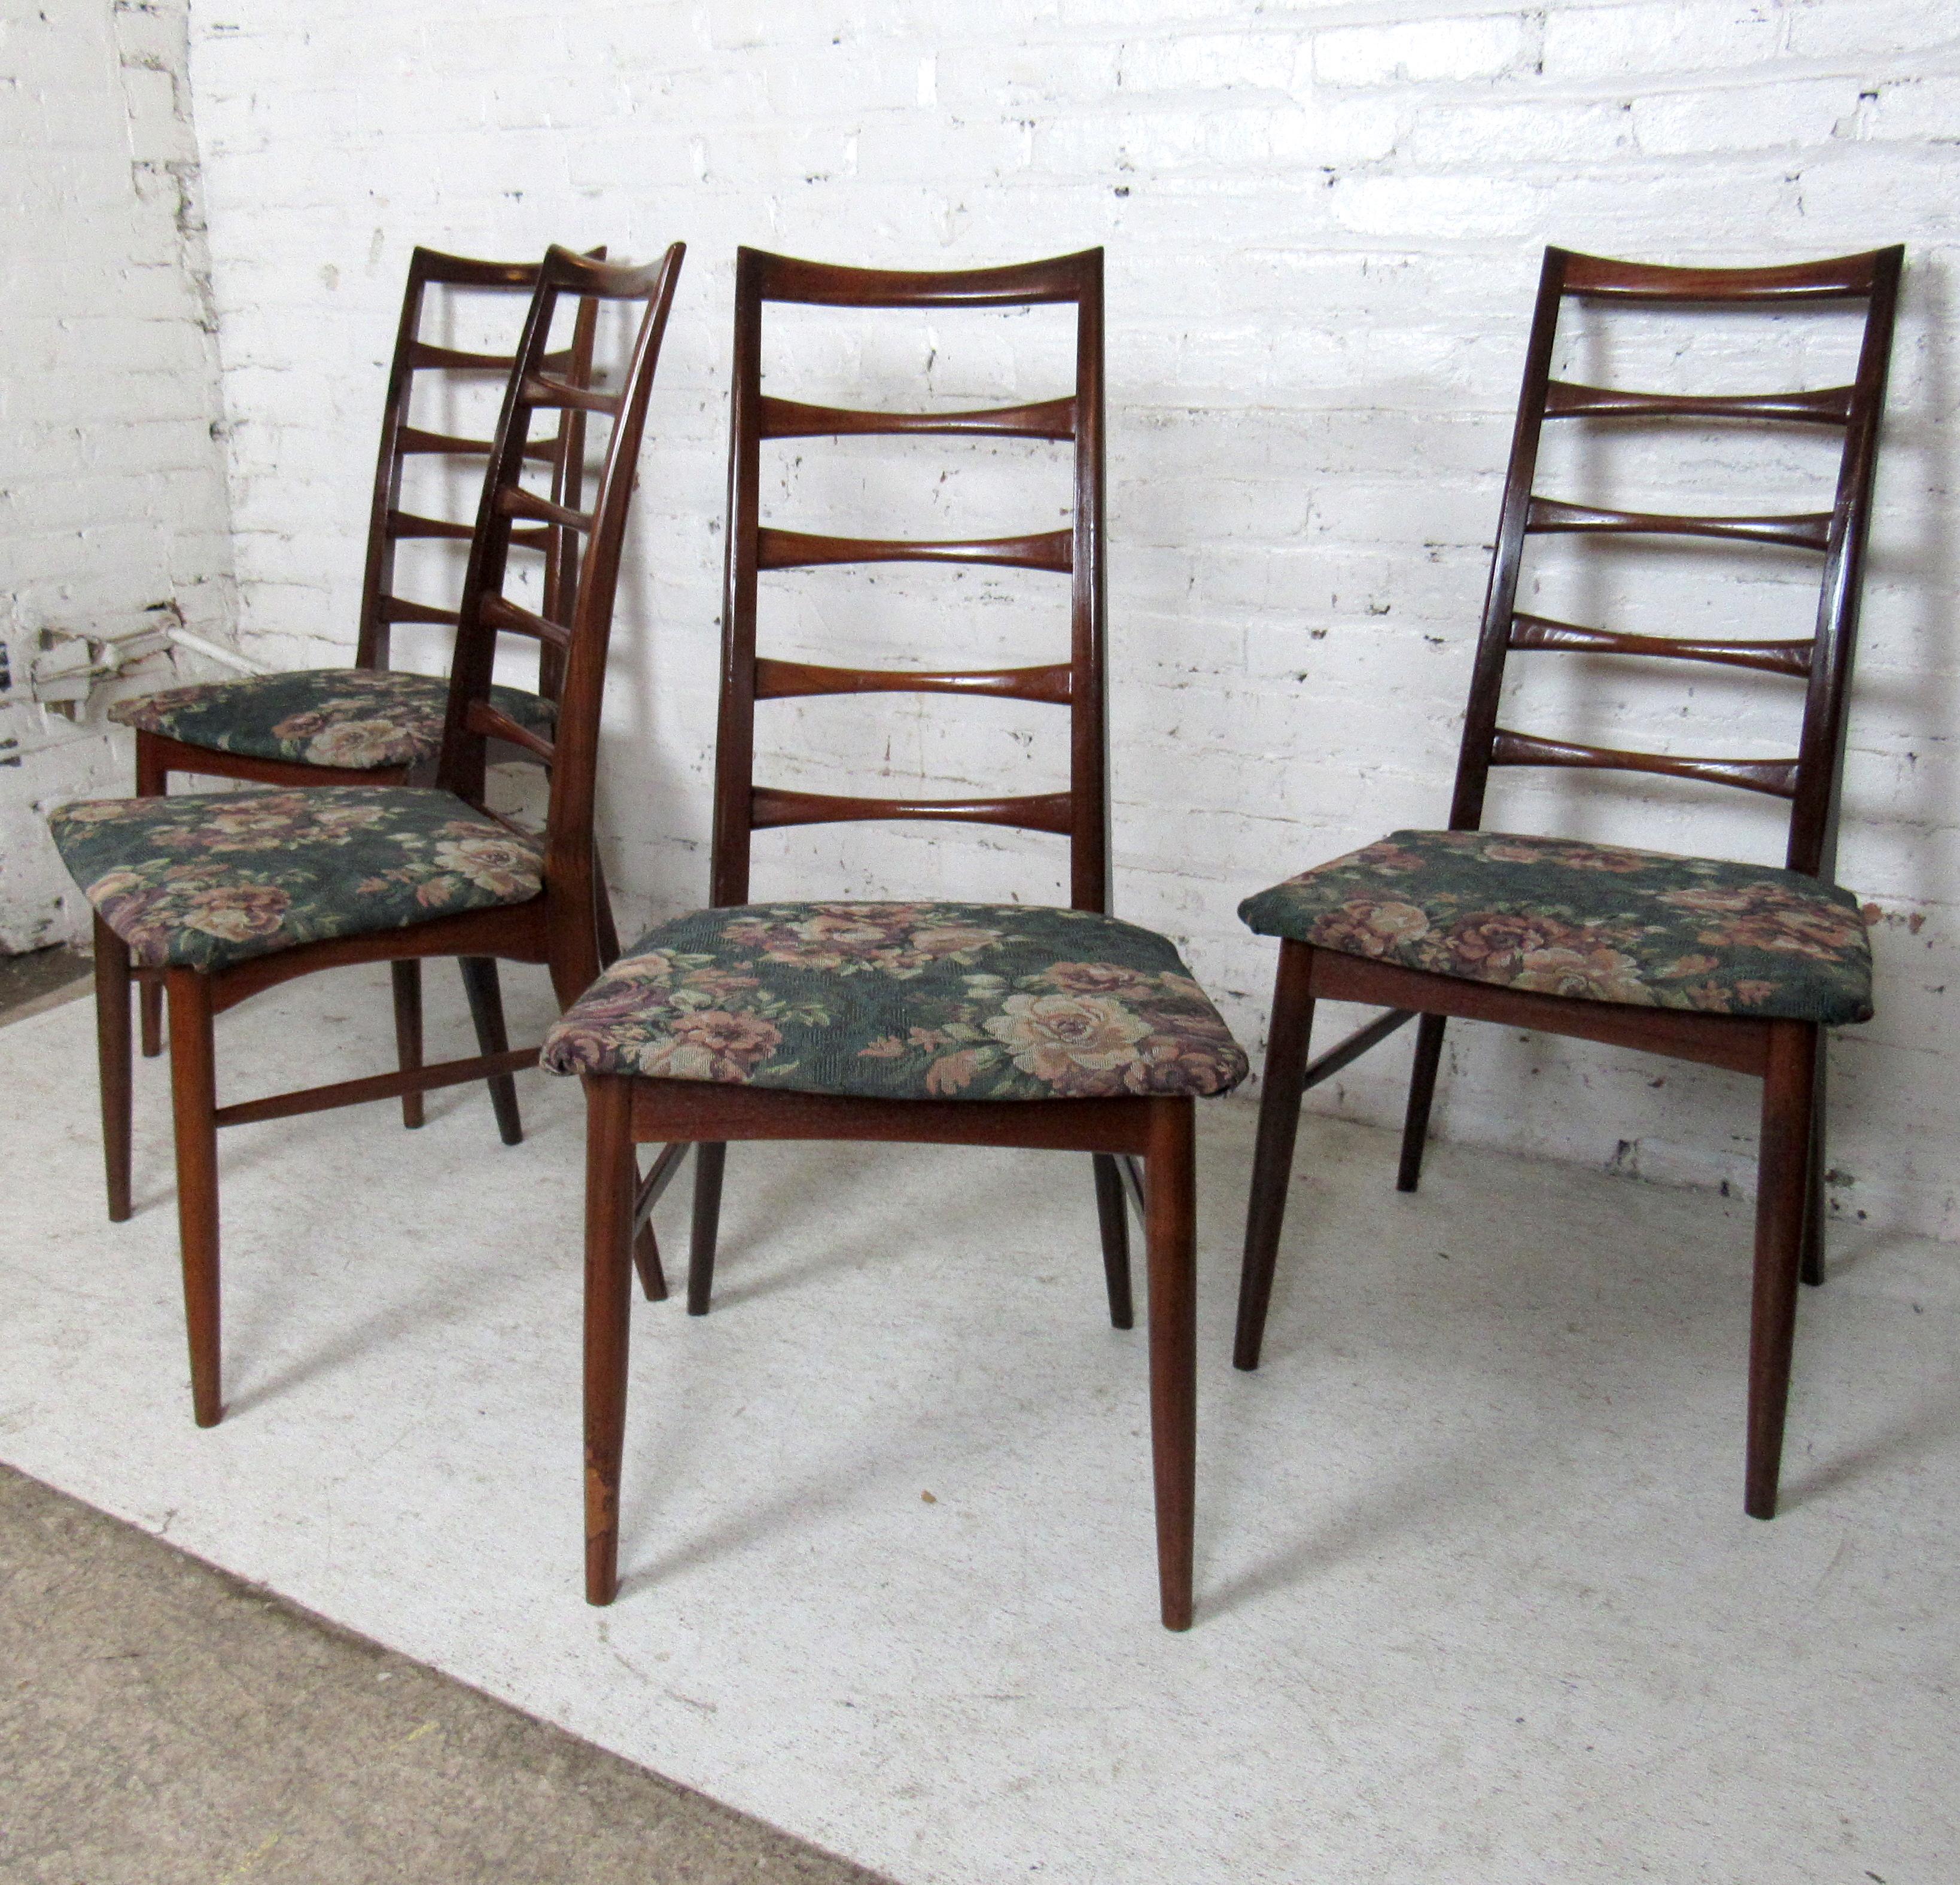 Mid-Century Modern set of four dining chairs by Niels Koefoed featuring a high slatted ladder back and floral reupholstery.

(Please confirm item location - NY or NJ - with dealer).